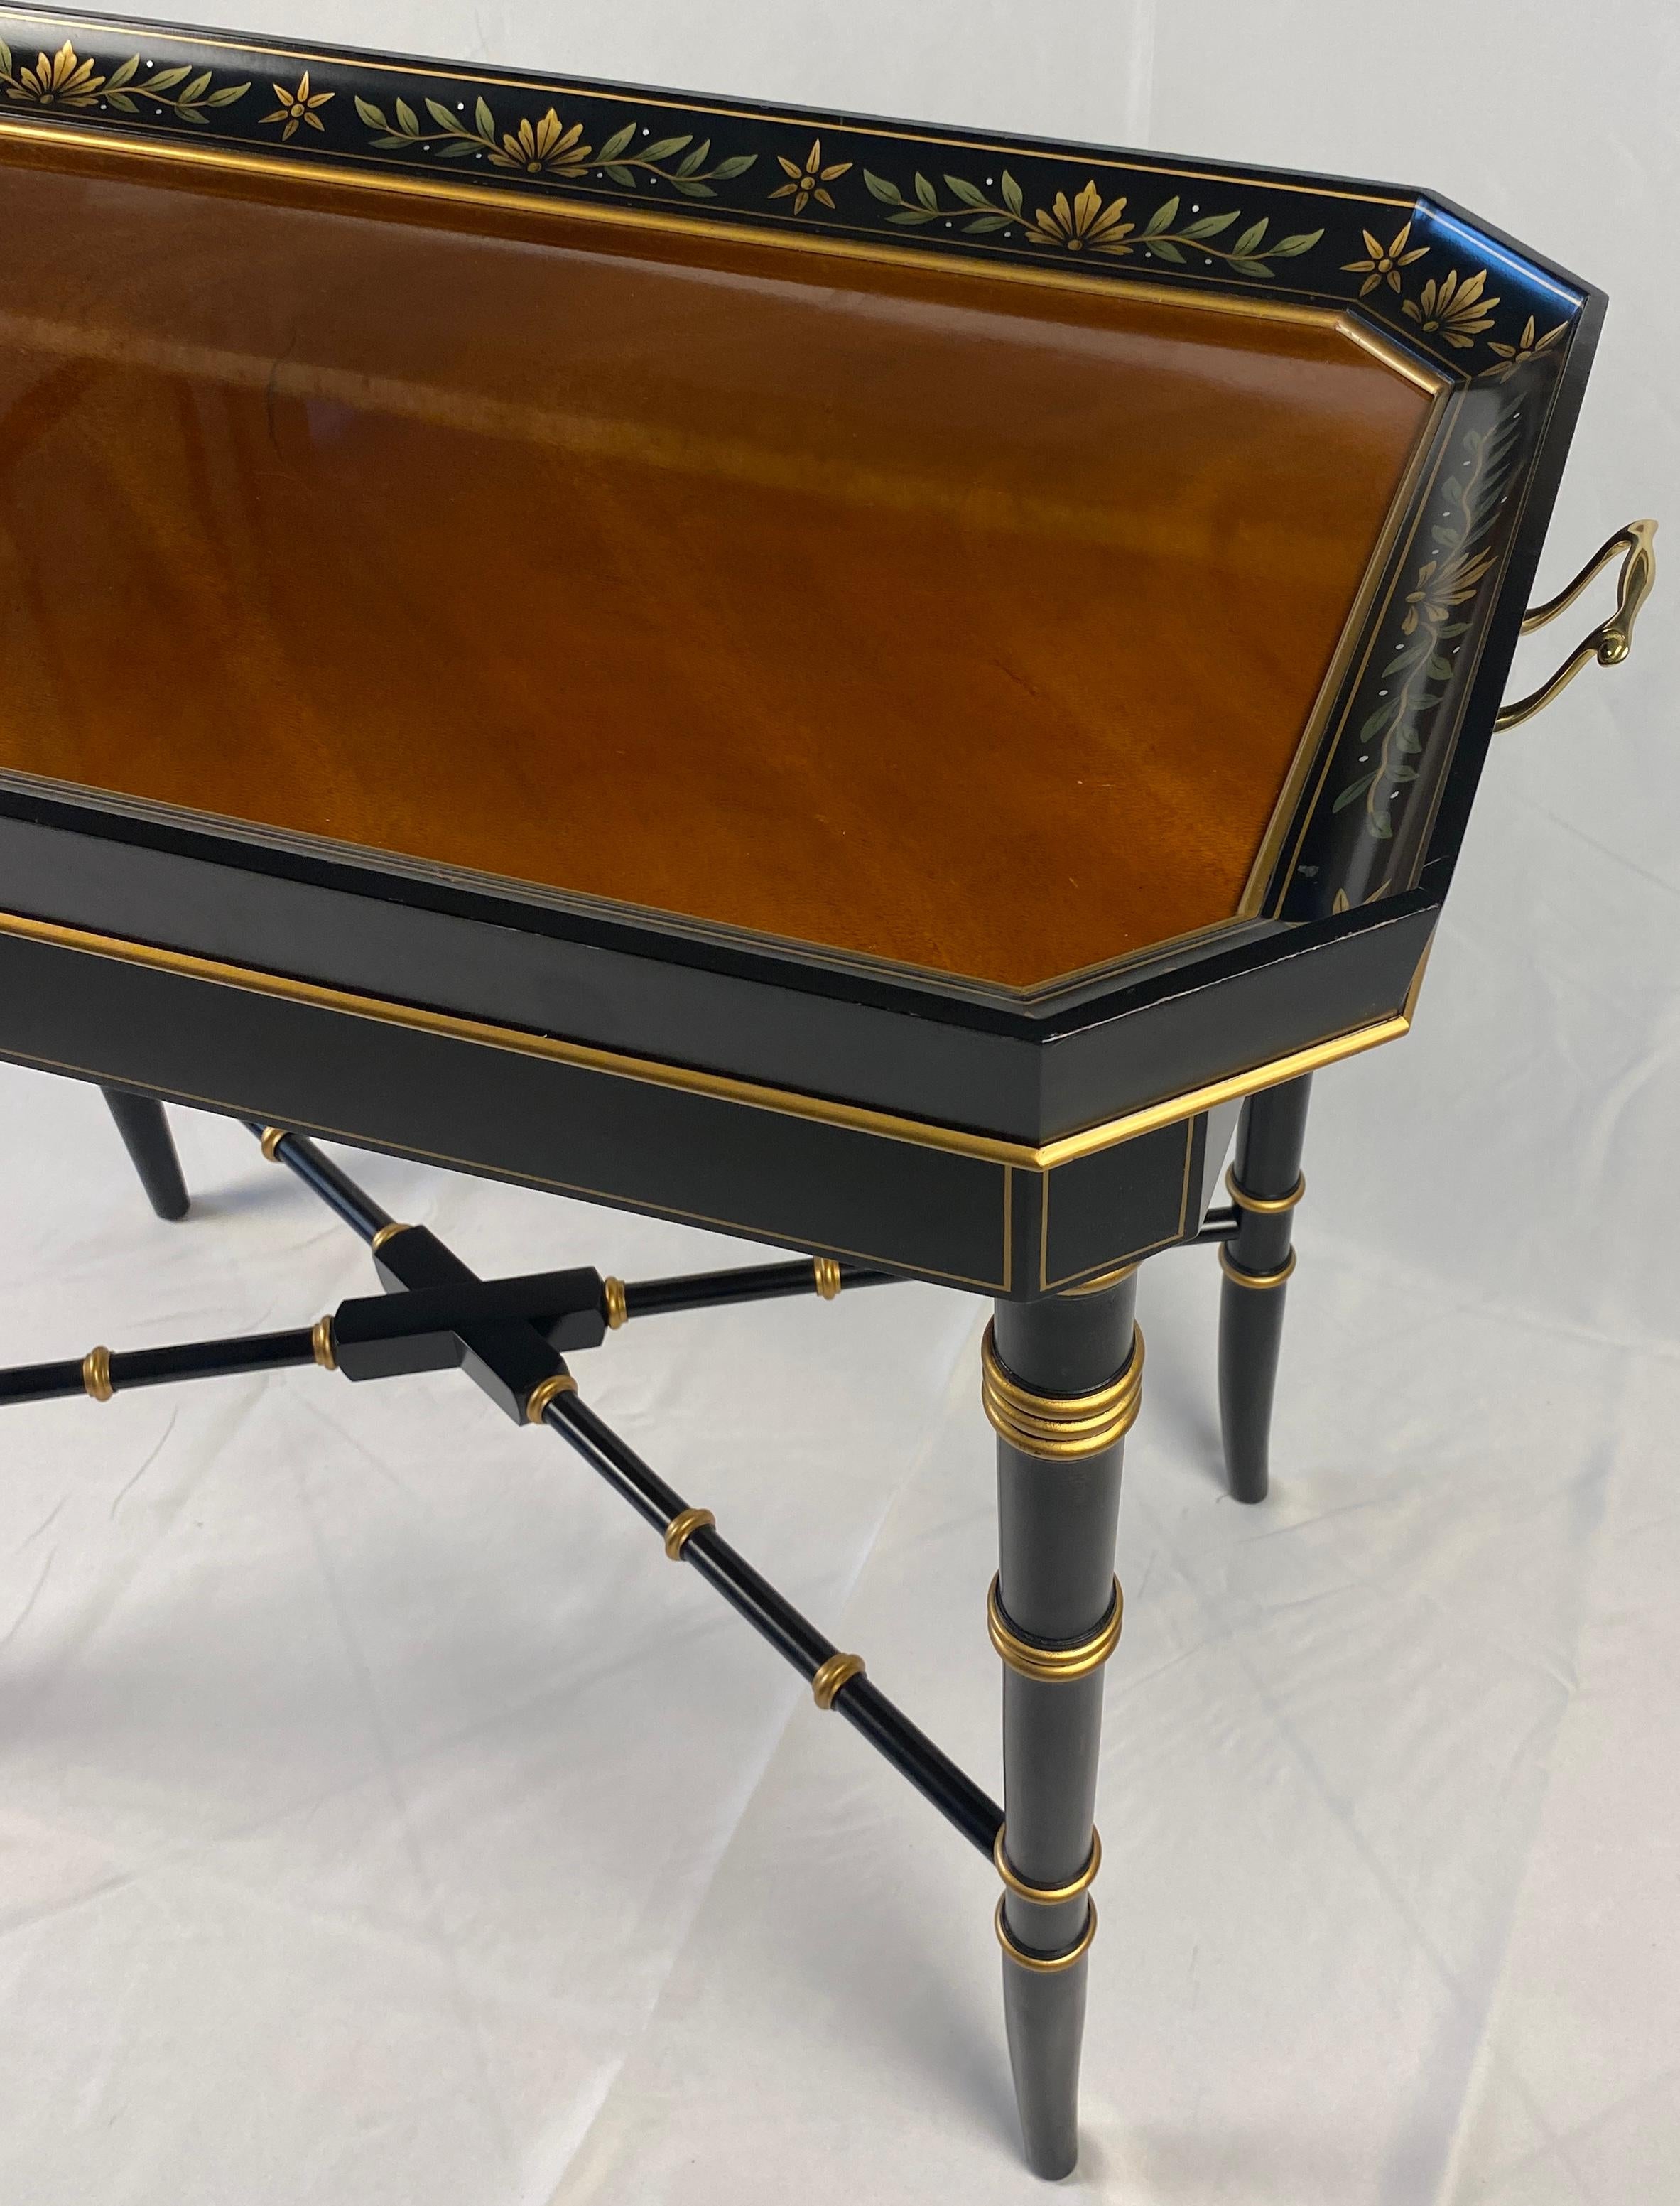 20th Century Black and Gold Wooden Tray Table Bamboo Style Legs For Sale